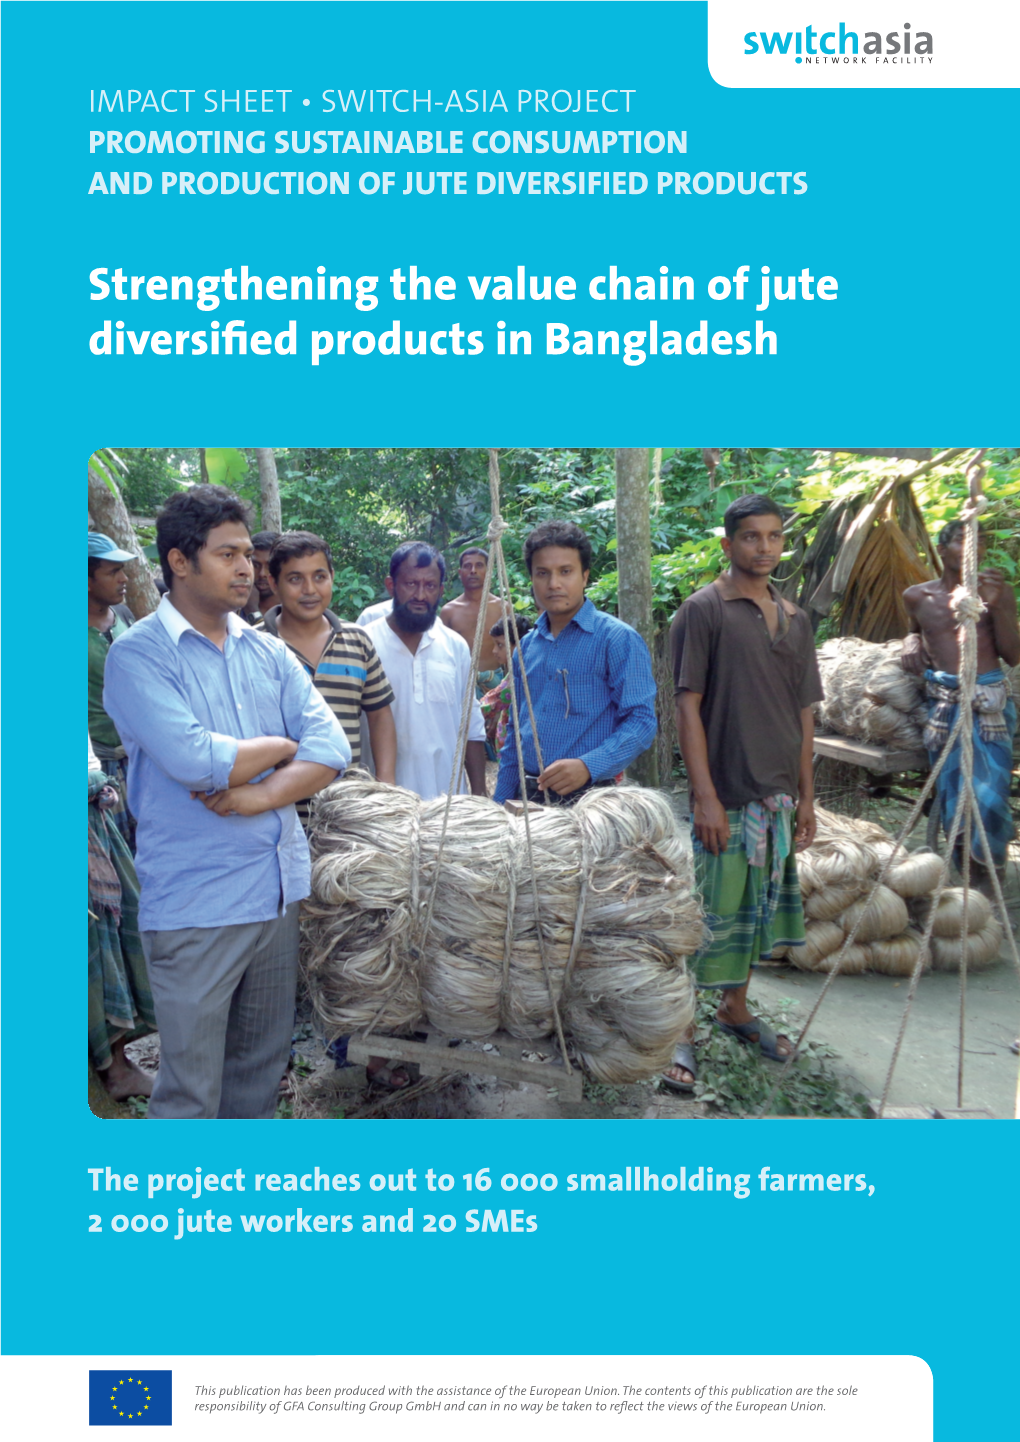 Strengthening the Value Chain of Jute Diversified Products in Bangladesh